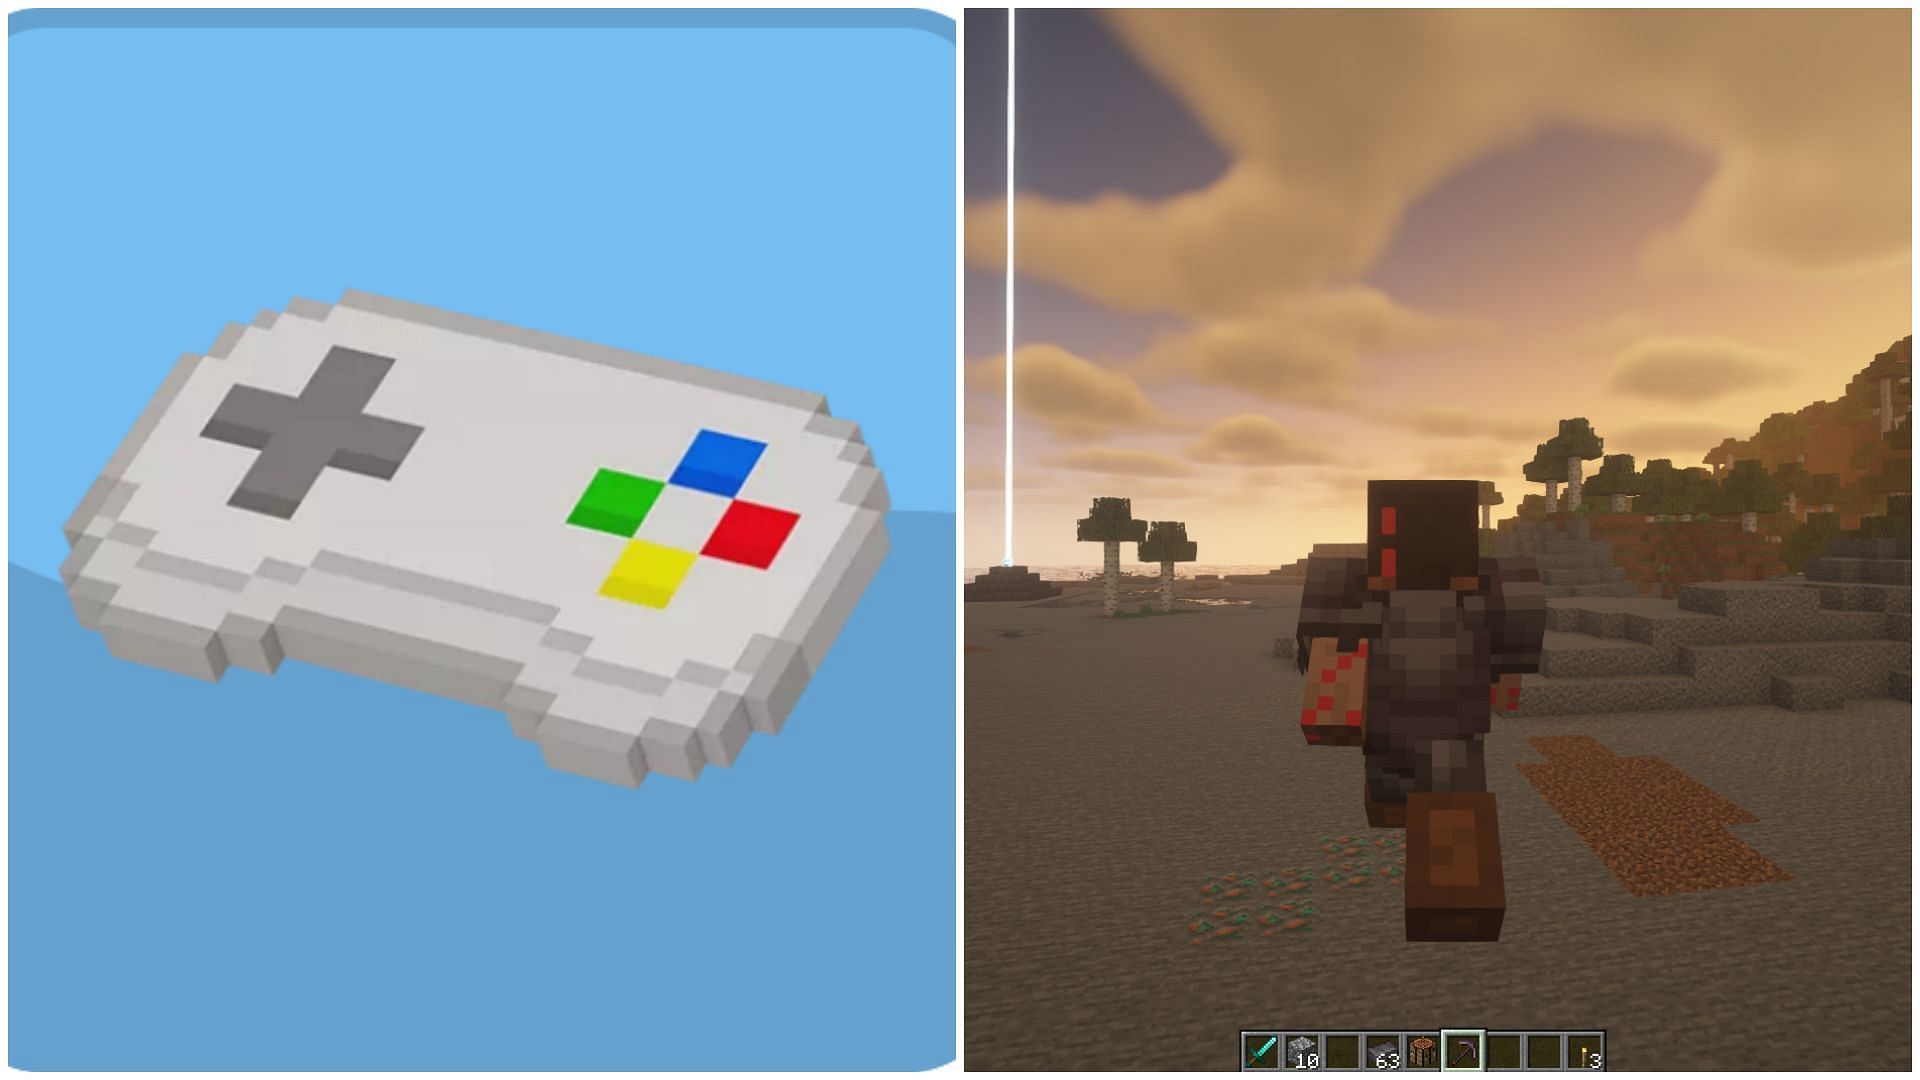 Controllable is a Minecraft mod that allow players to use controller on Java Edition (Image via Mojang)